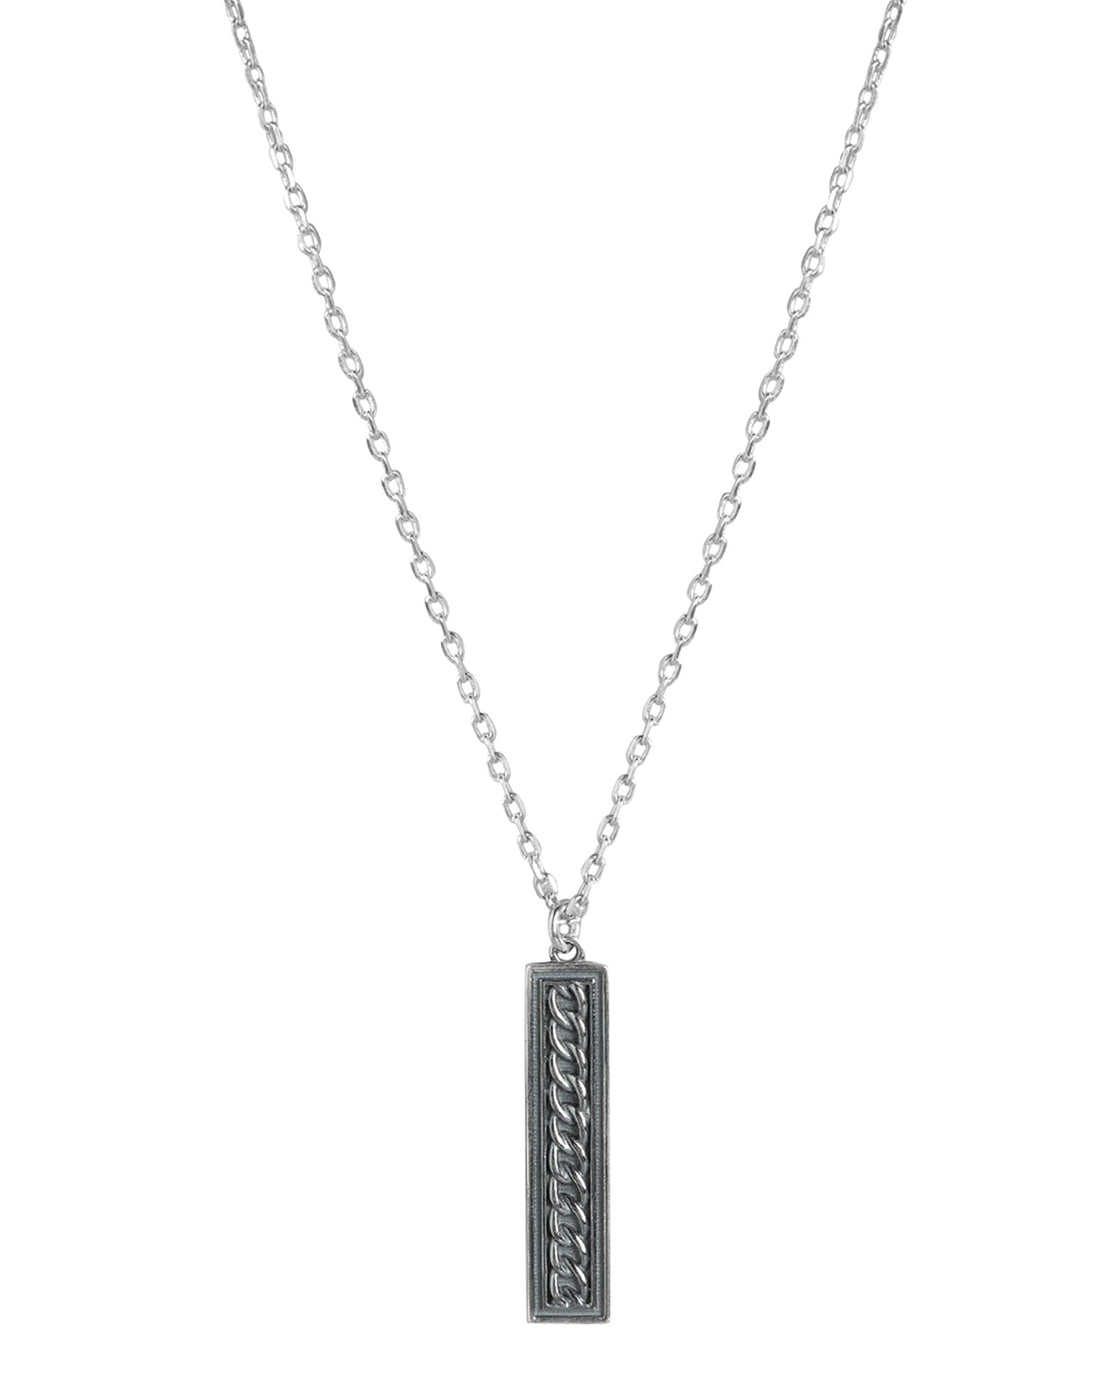 Rhodium Plated Oxidised Bar Pendant With Chain For Men